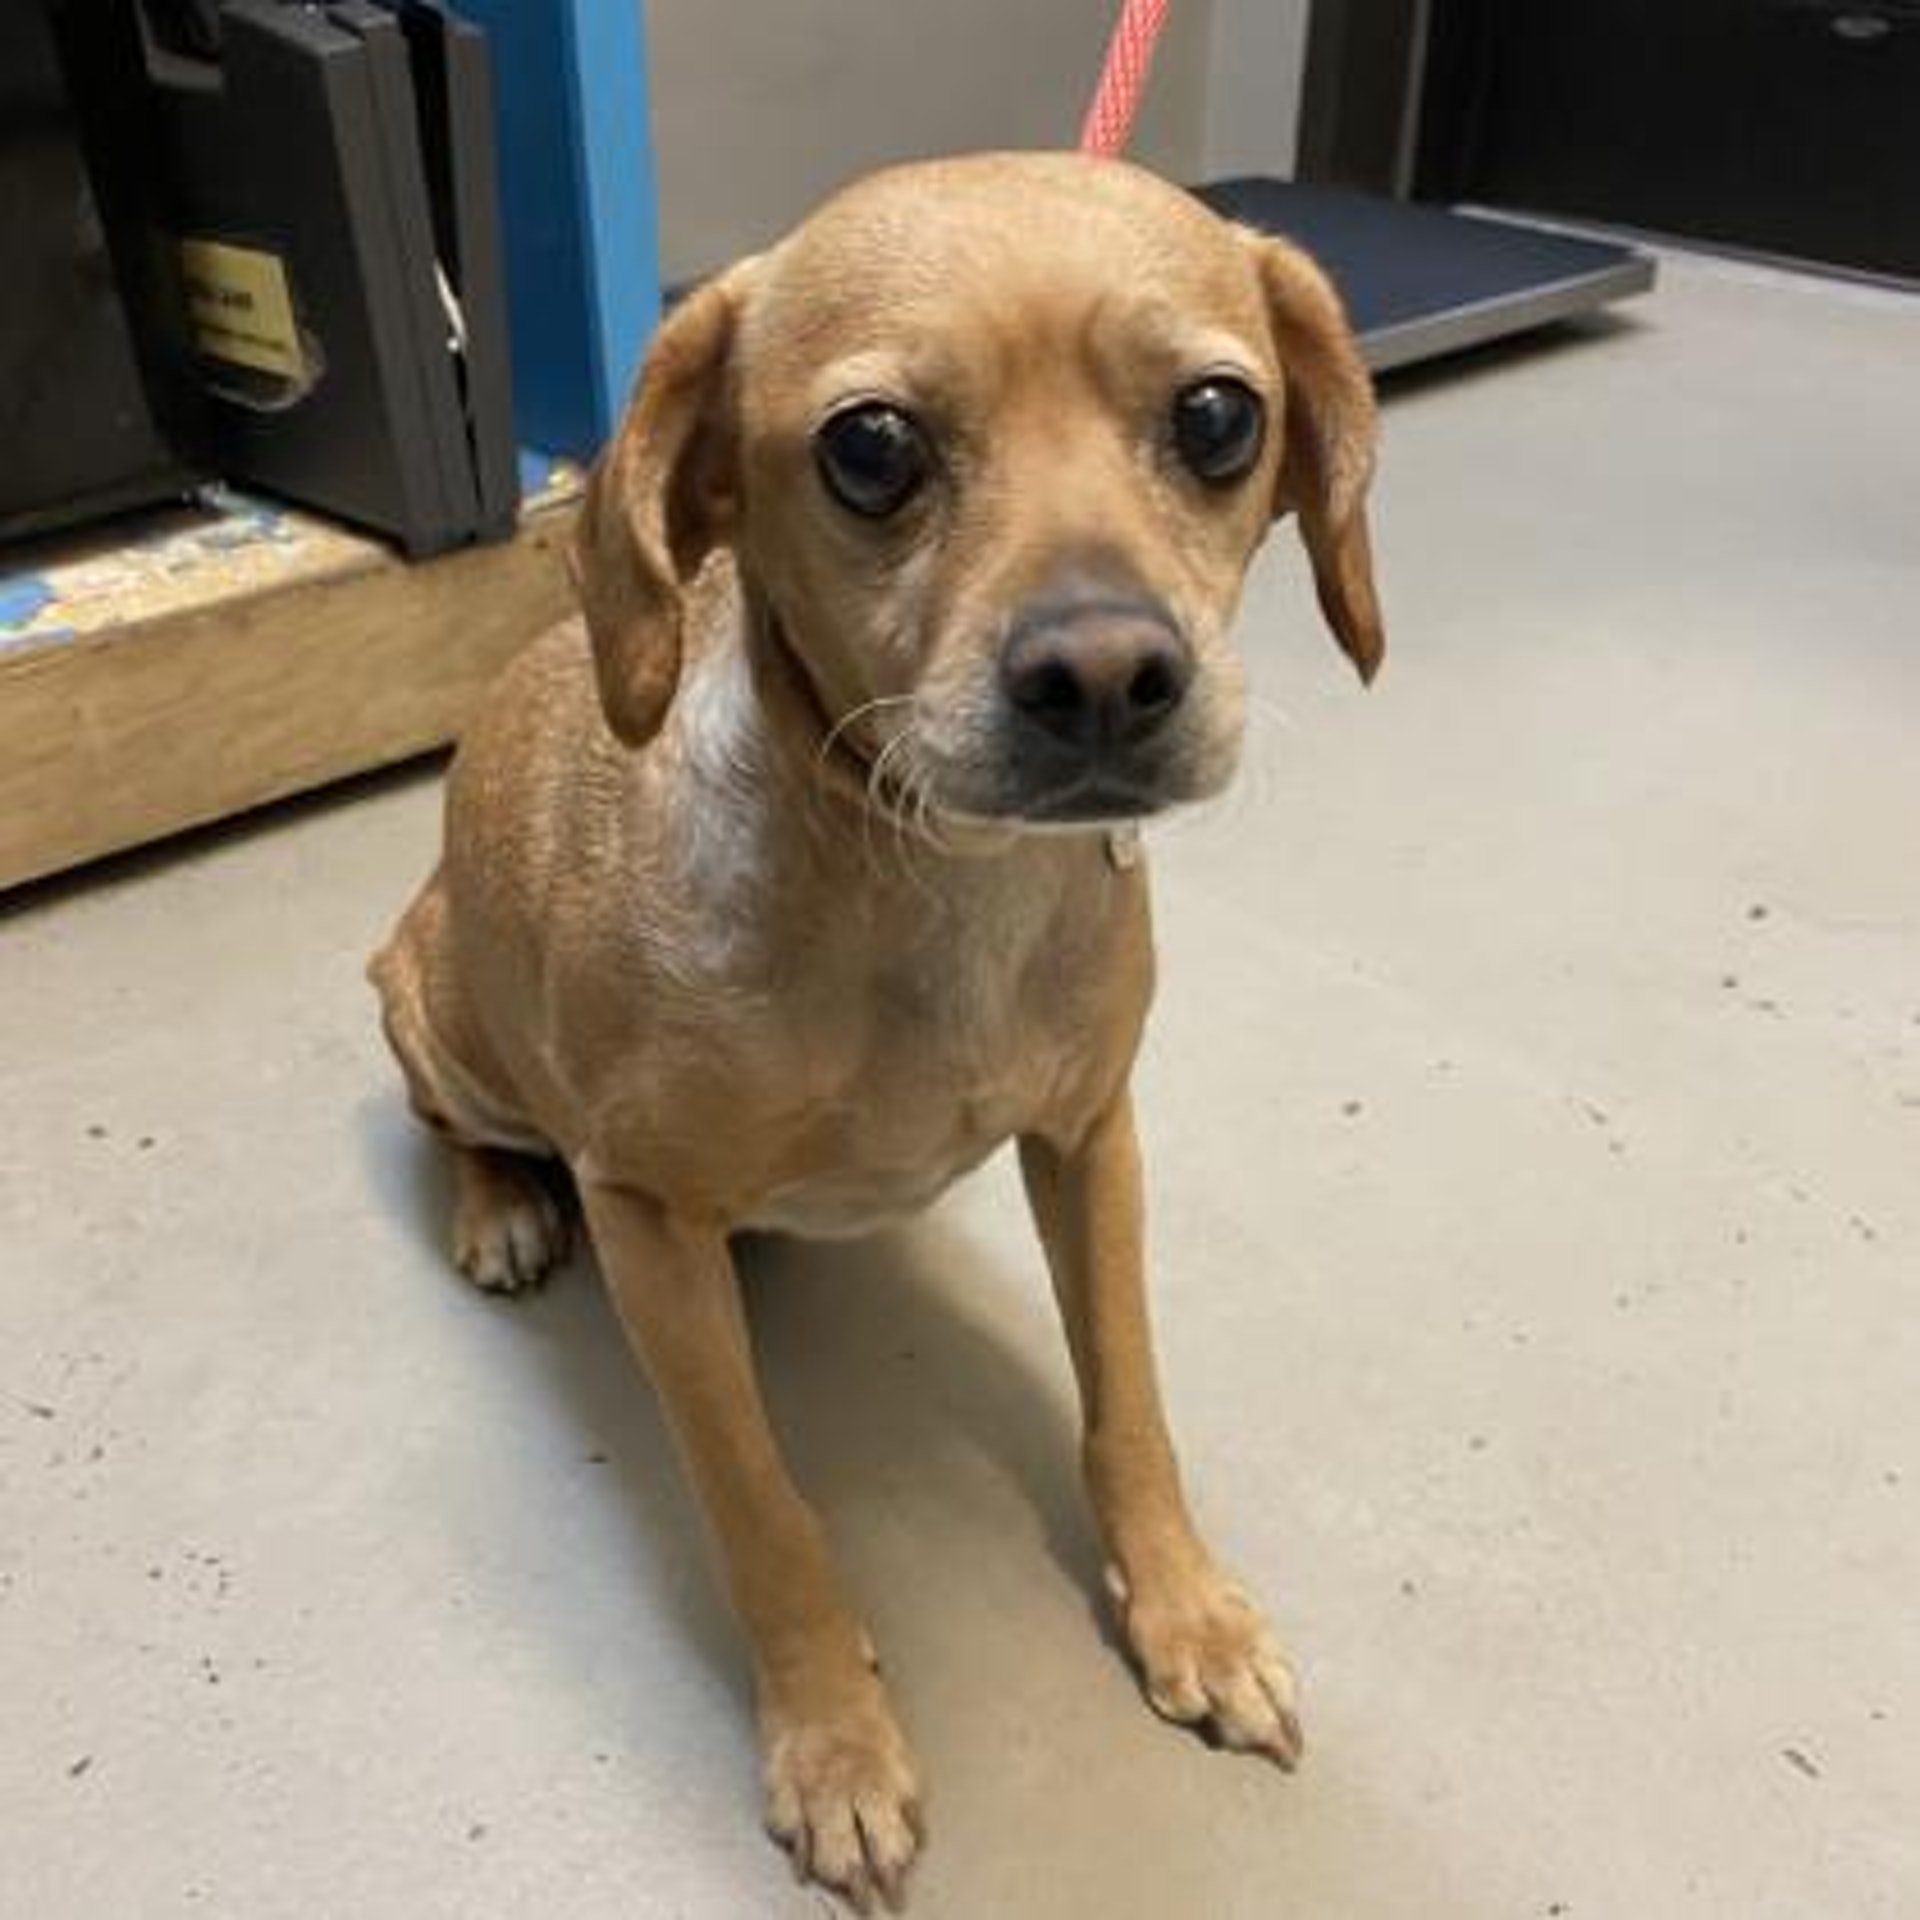 The dog is now waiting for its owner to take it back, but the organization is also looking for a new home for it.  (Wisconsin Humane Society photo)